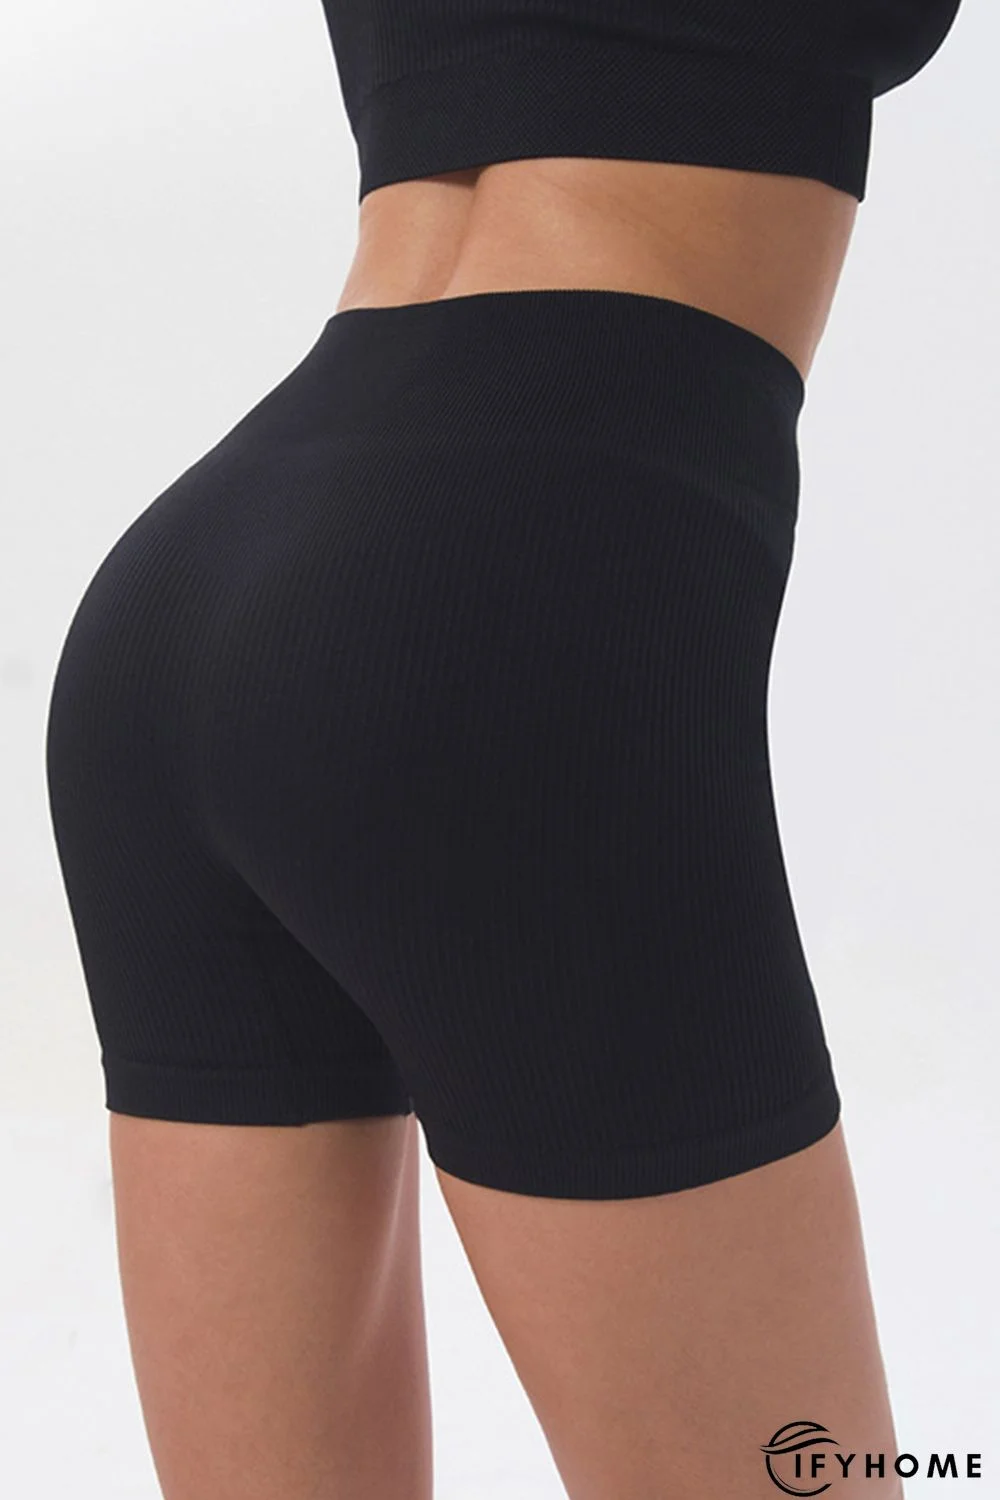 Black Solid Color High Waist Active Yoga Shorts | IFYHOME